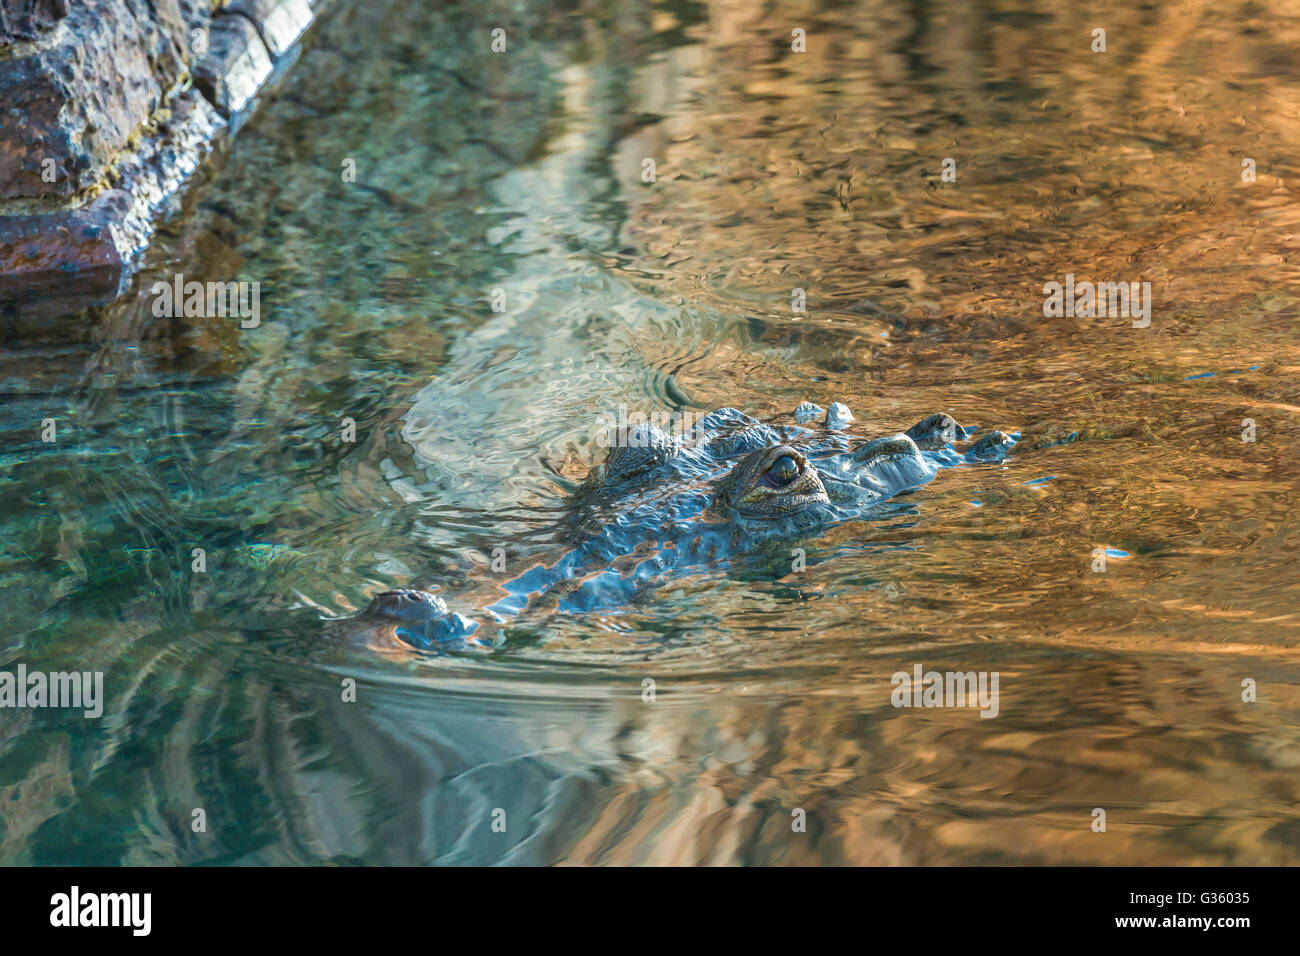 American Crocodile, Crocodylus acutus, swimming in the moat of Fort Jefferson, Dry Tortugas National Park, Florida, USA Stock Photo